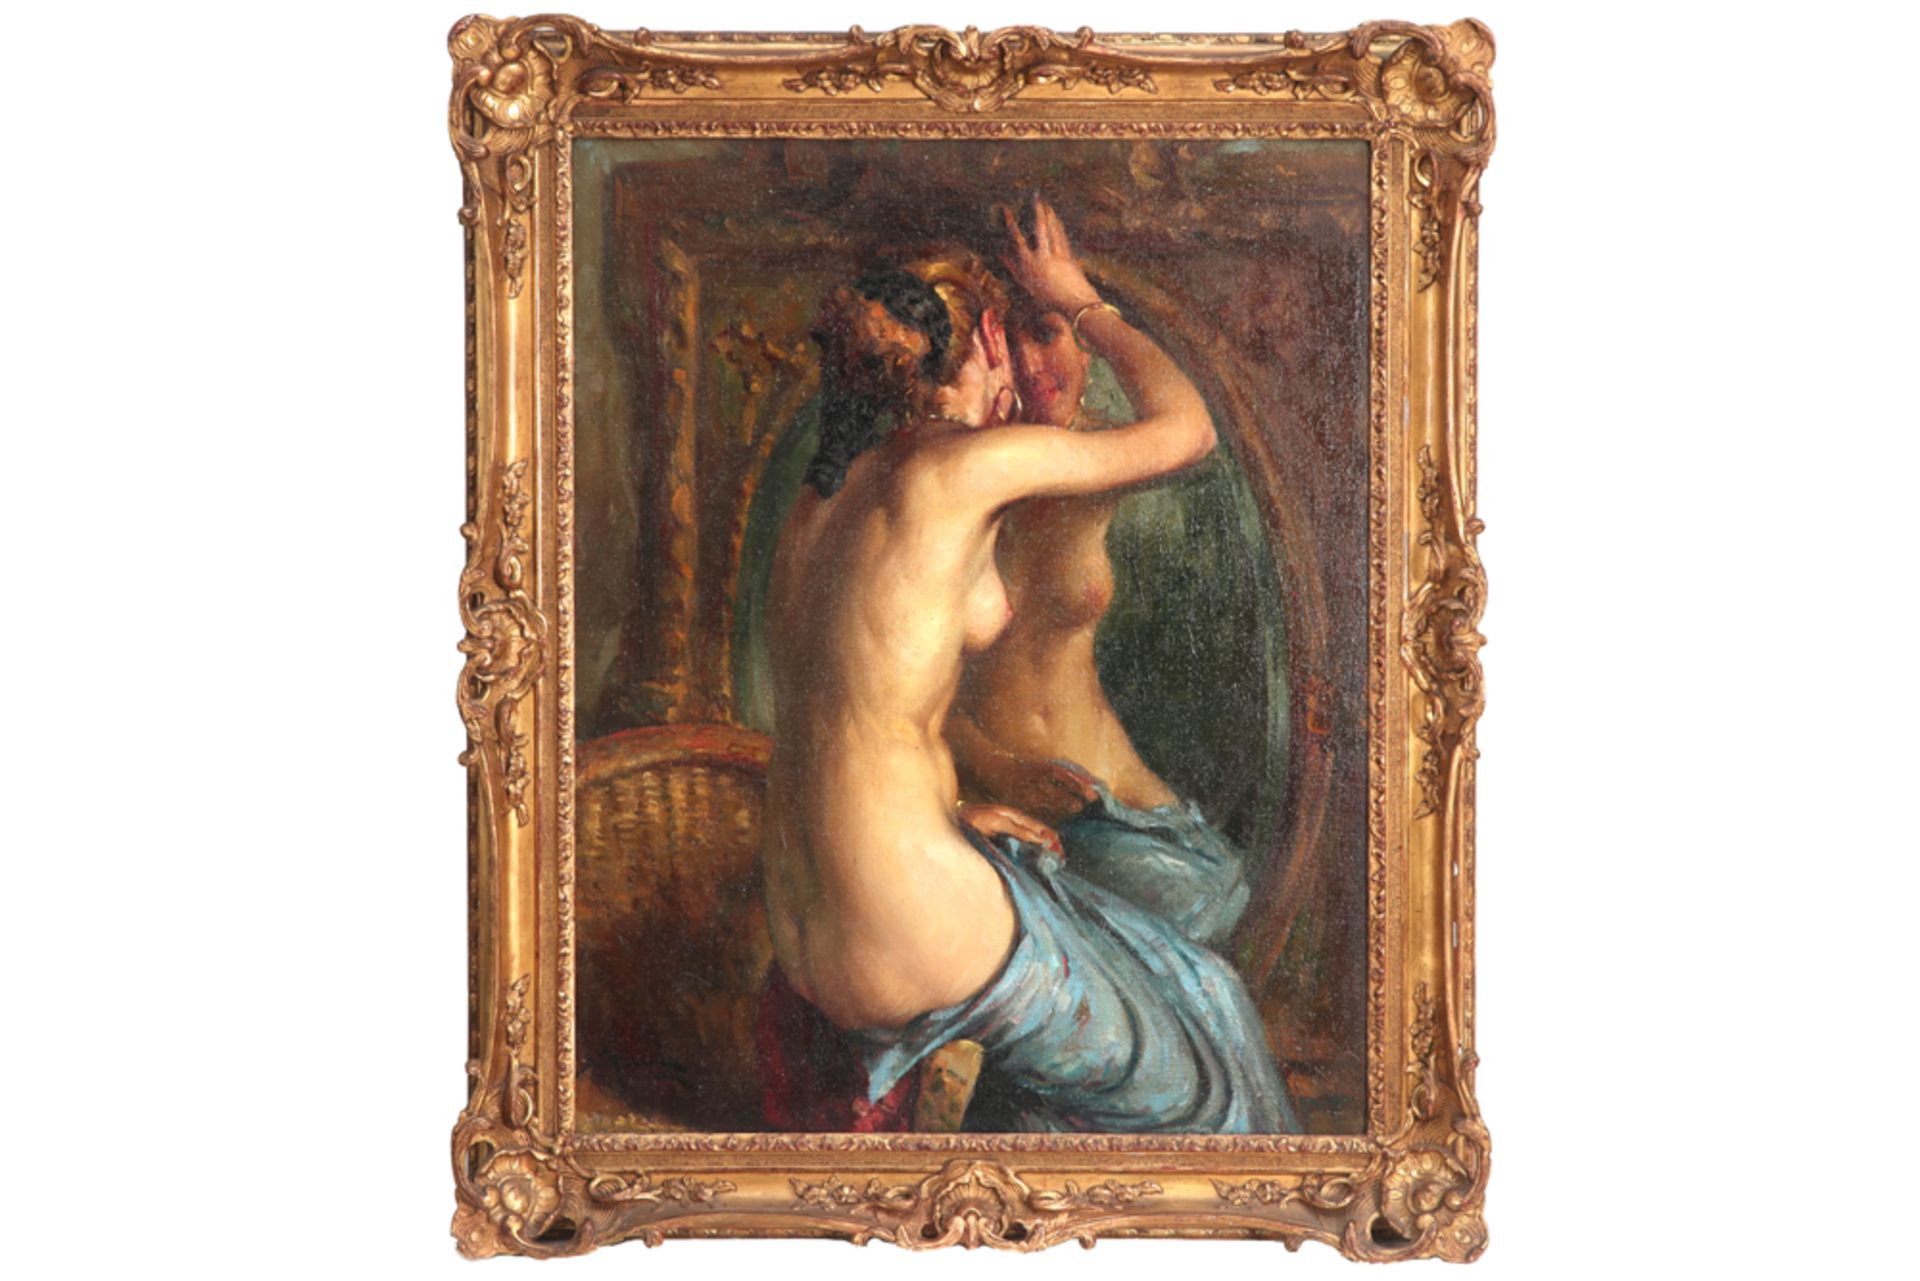 20th Cent. Argentinian oil on canvas - signed Richard Durando Tobo || RICHARD DURANDO TOBO ( - Image 3 of 4